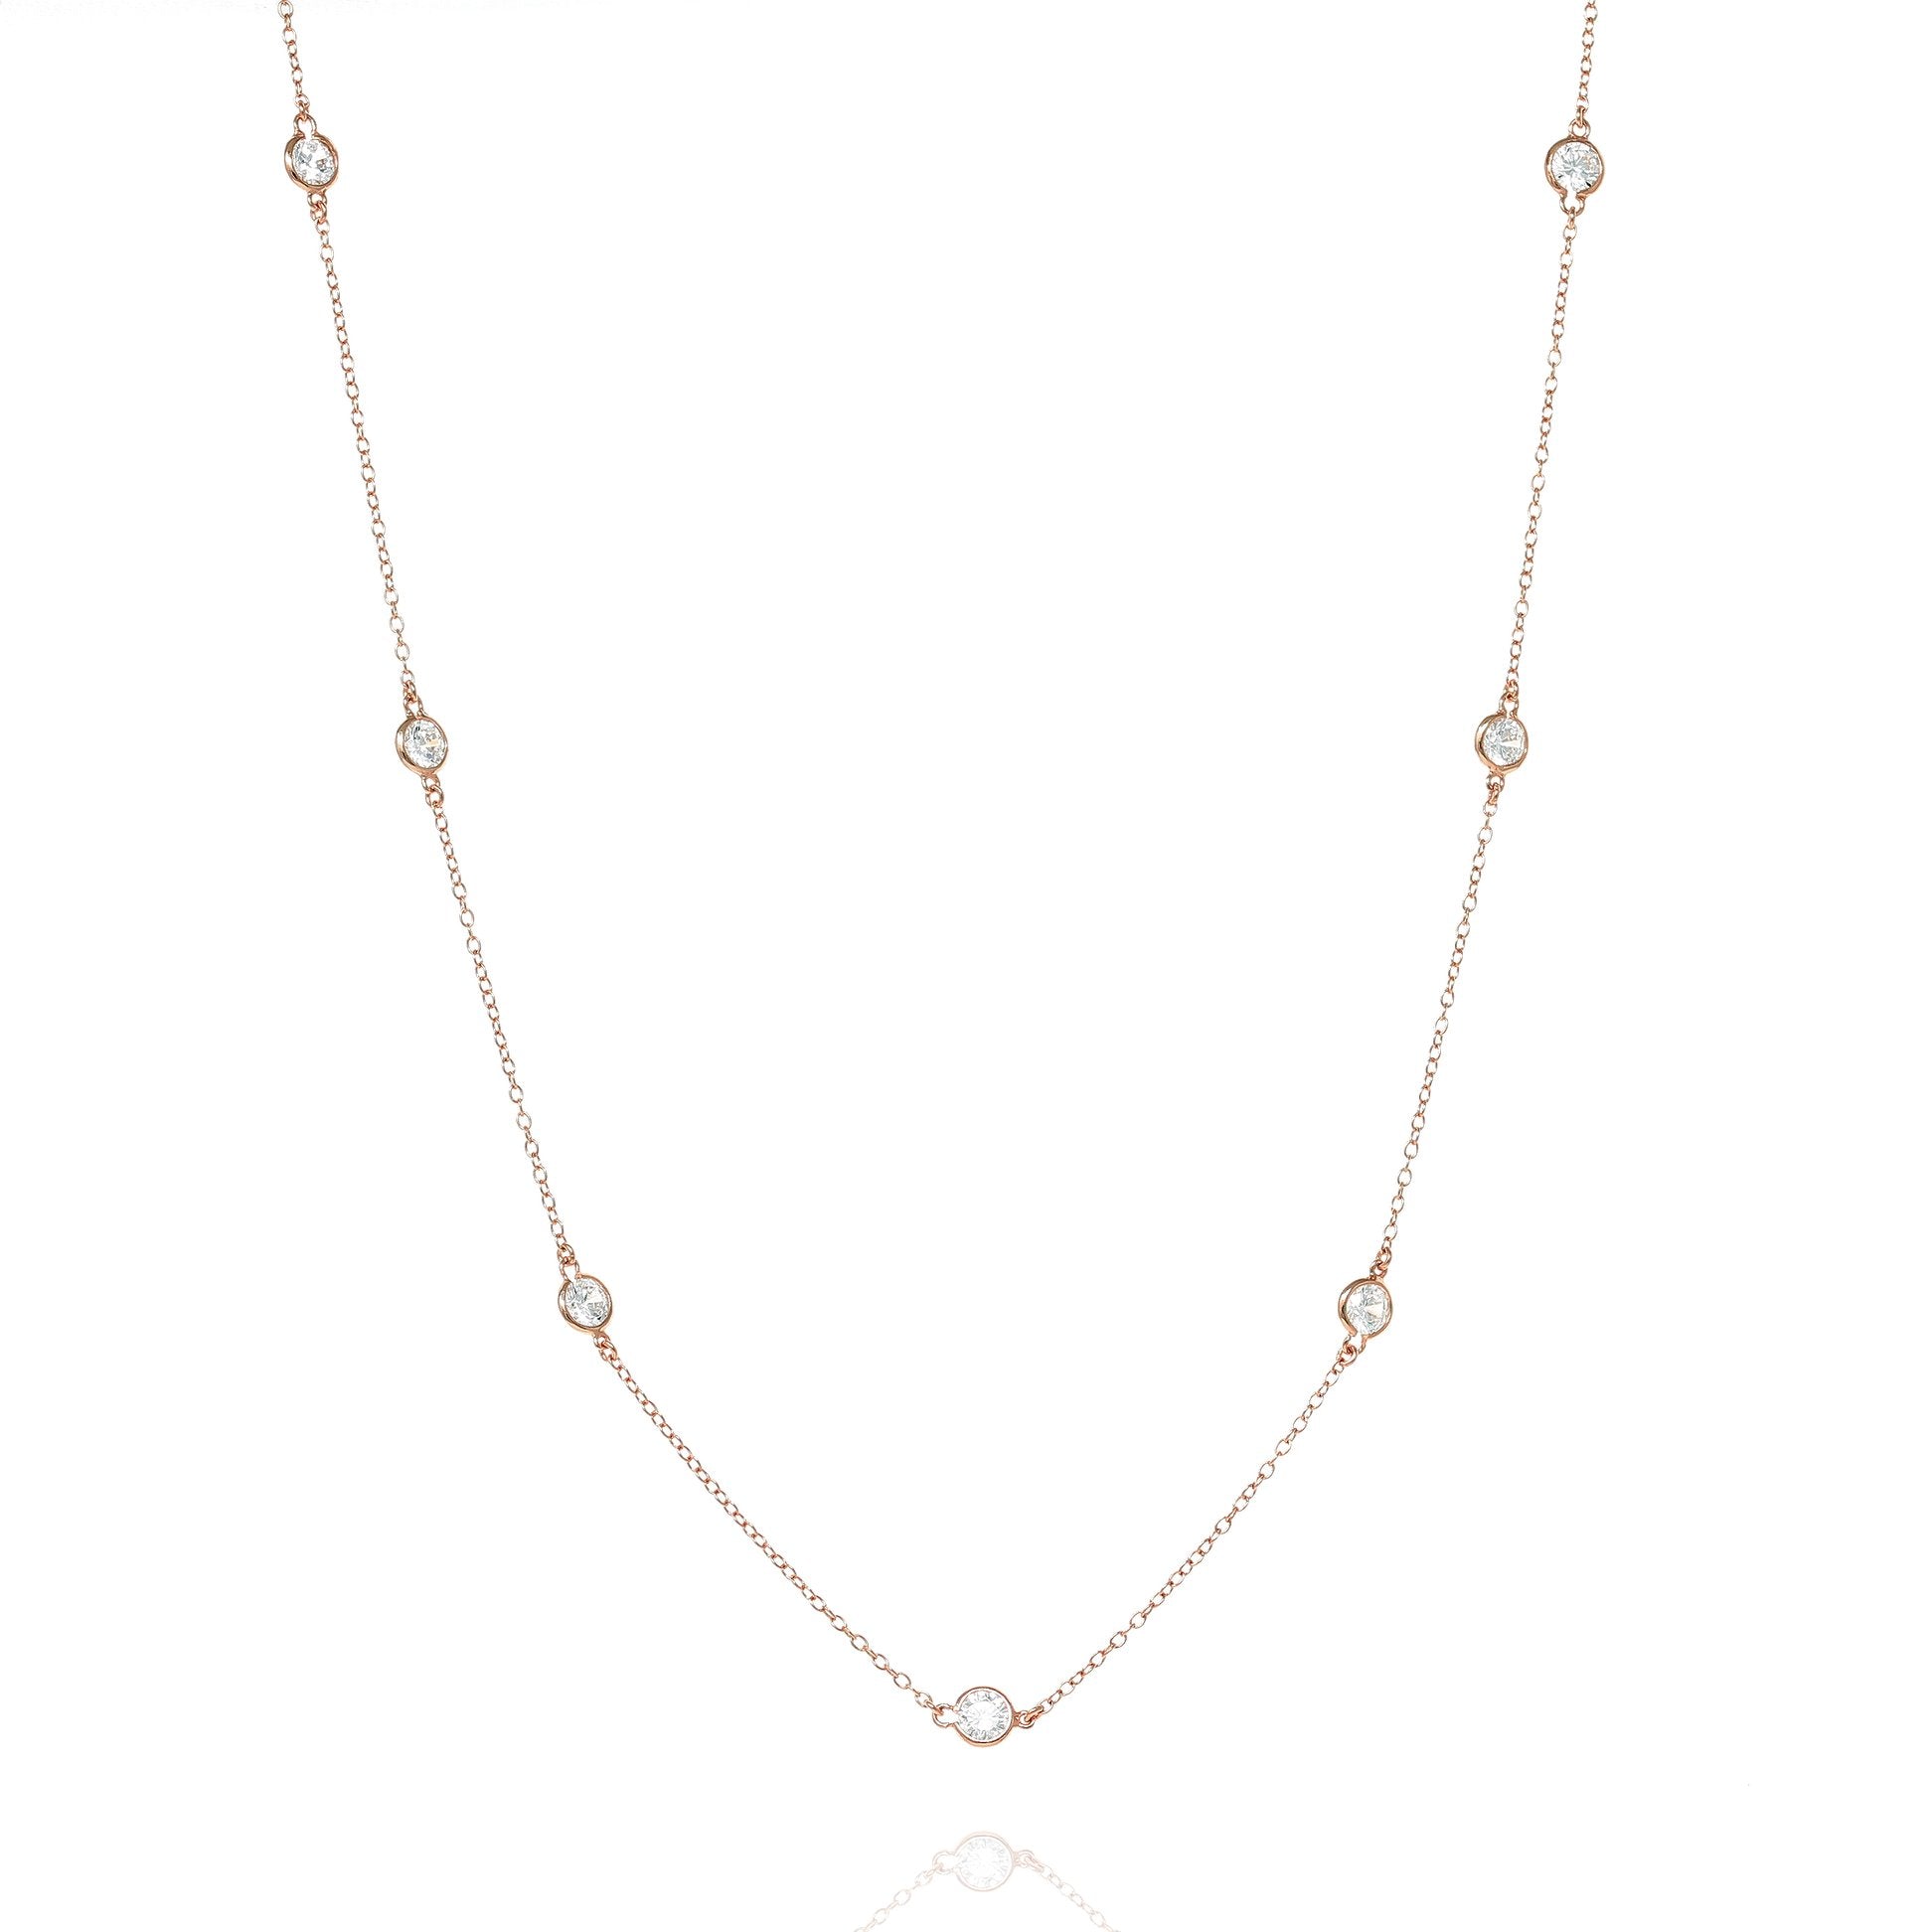 Rose Gold Brompton Chain Necklace with Cubic Zirconia - Lulu B Jewellery